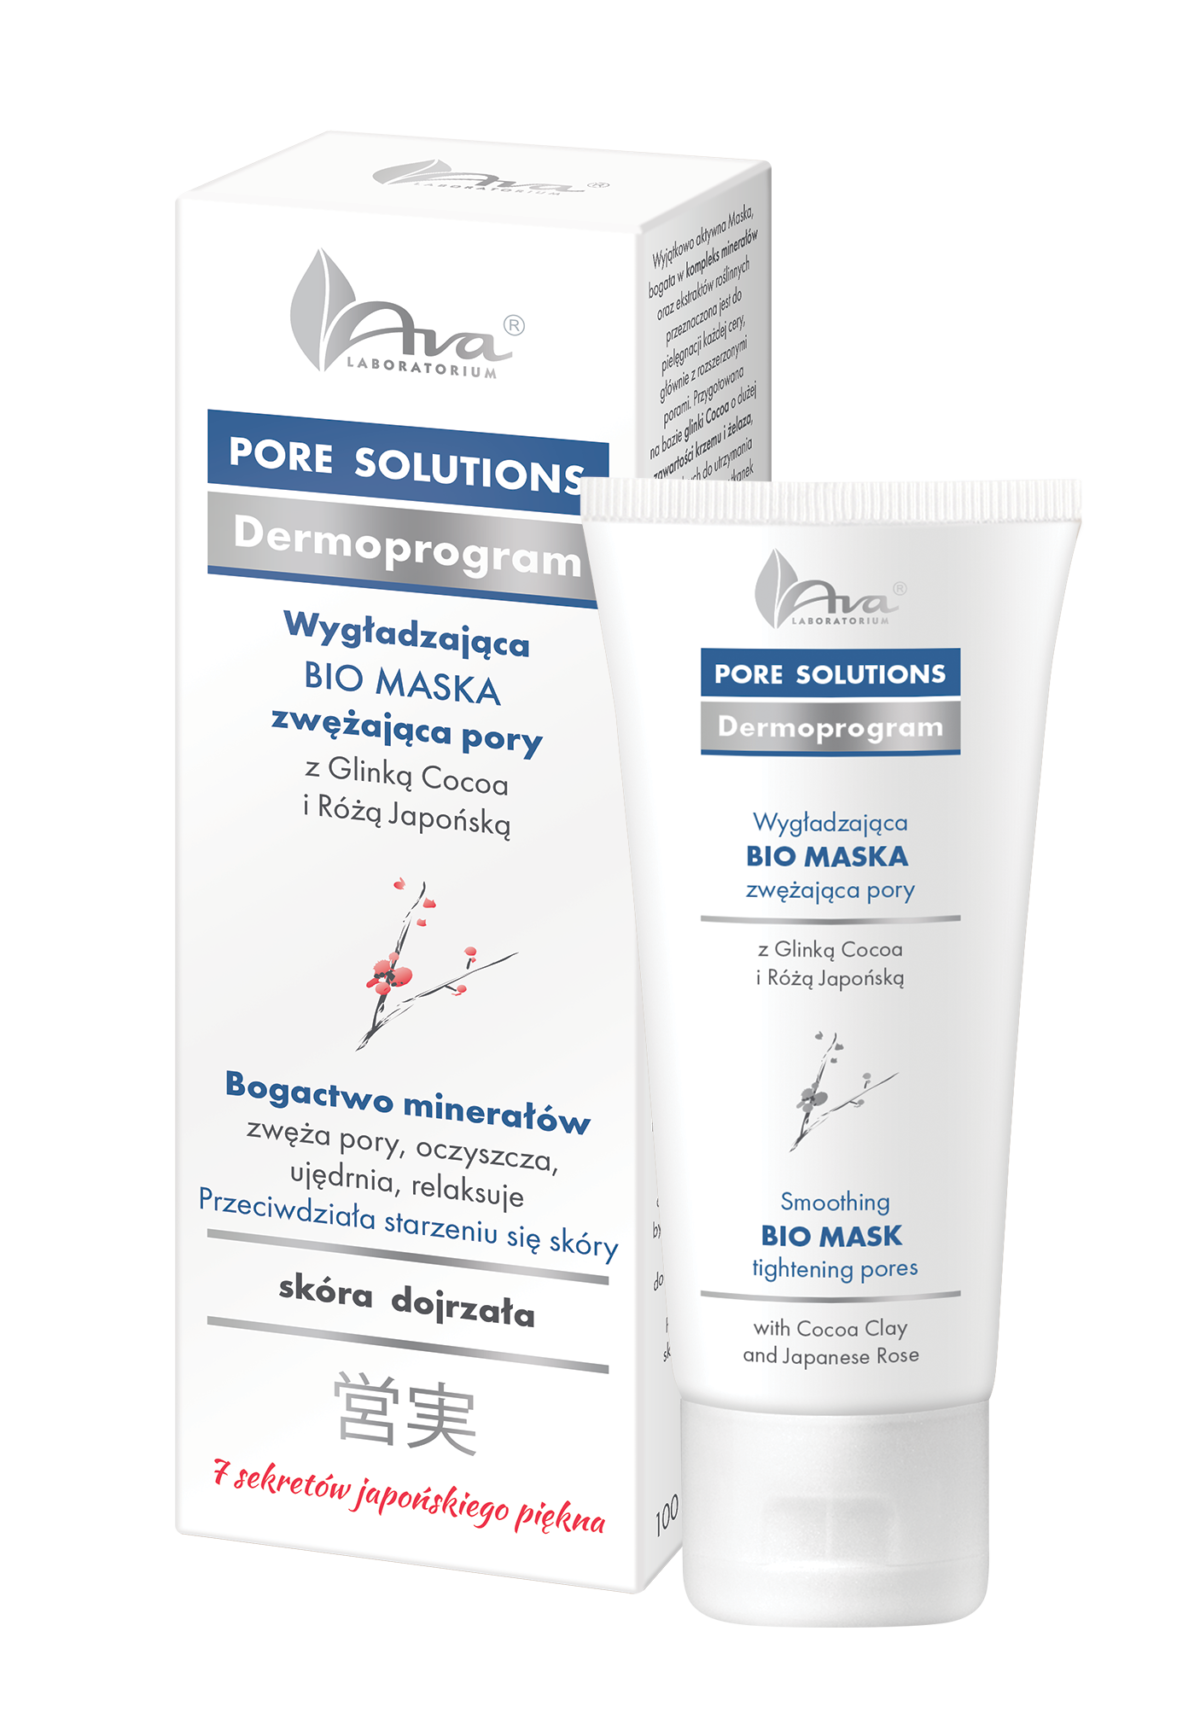 PORE SOLUTIONS Smoothing BIO MASK tightening pores with Cocoa Clay and Japanese Rose